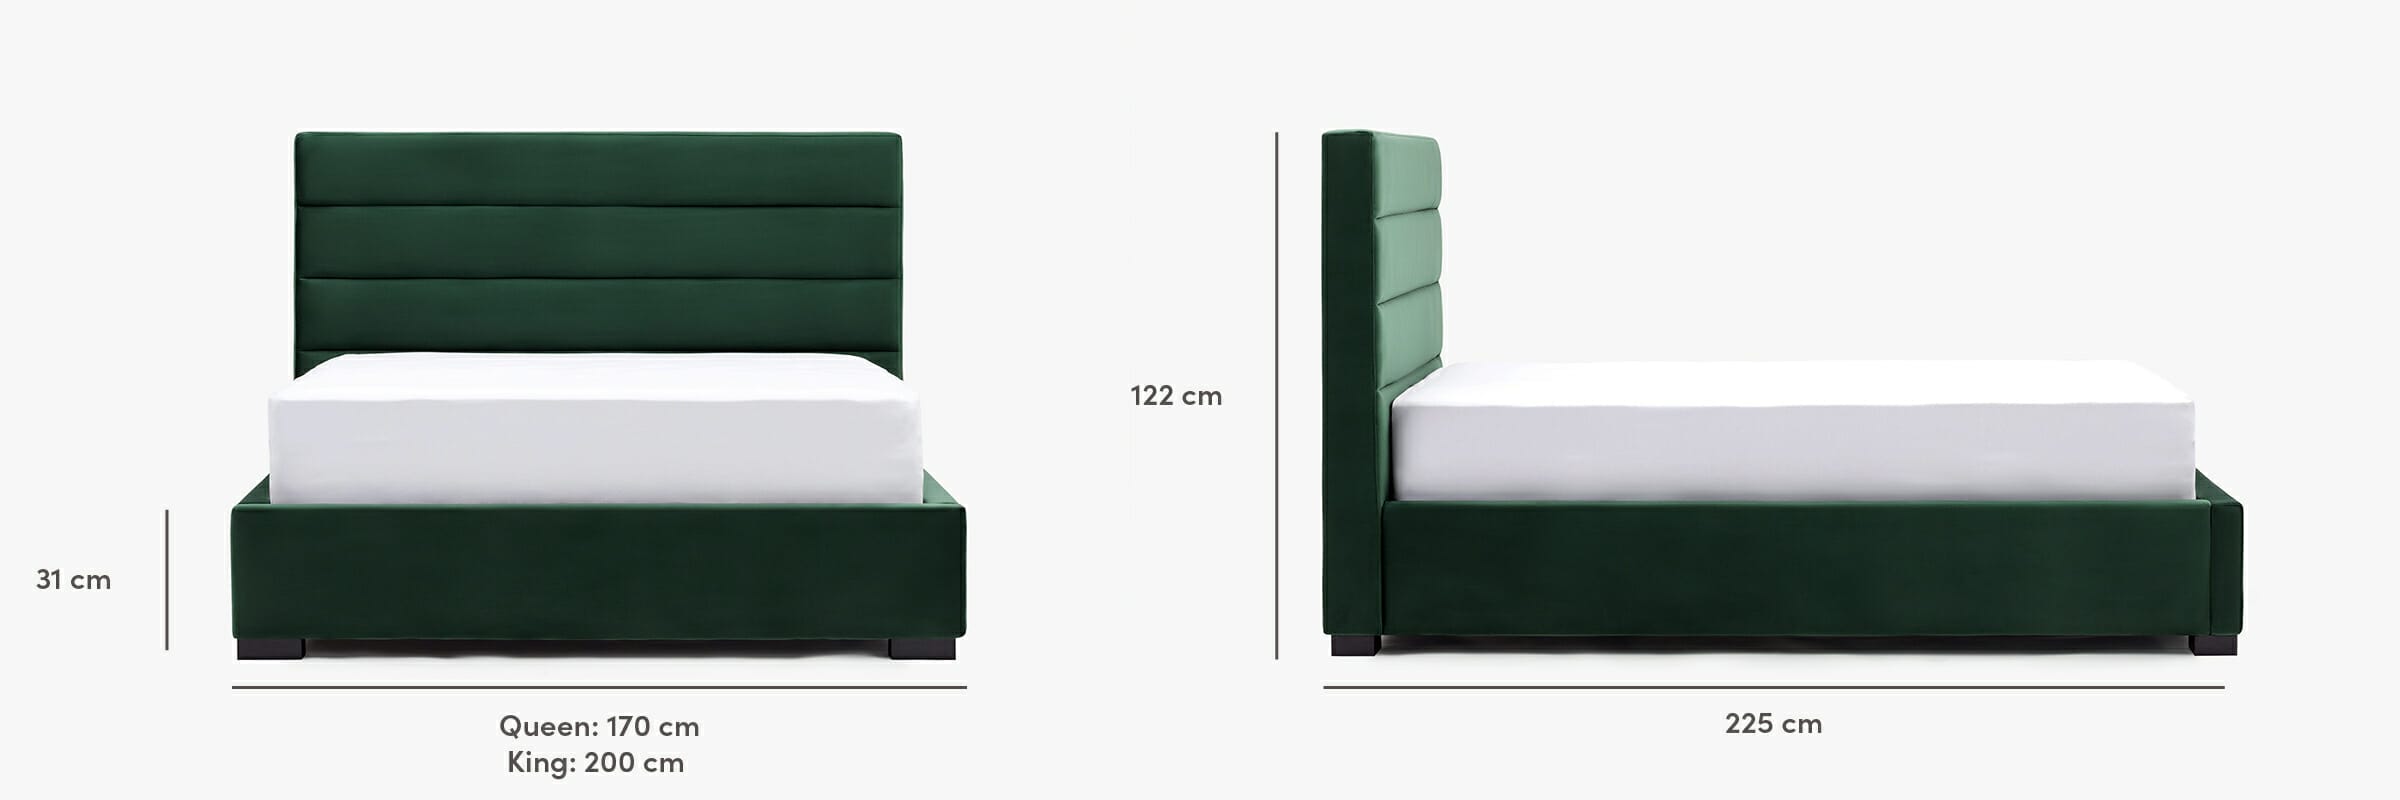 Oxford bed dimensions